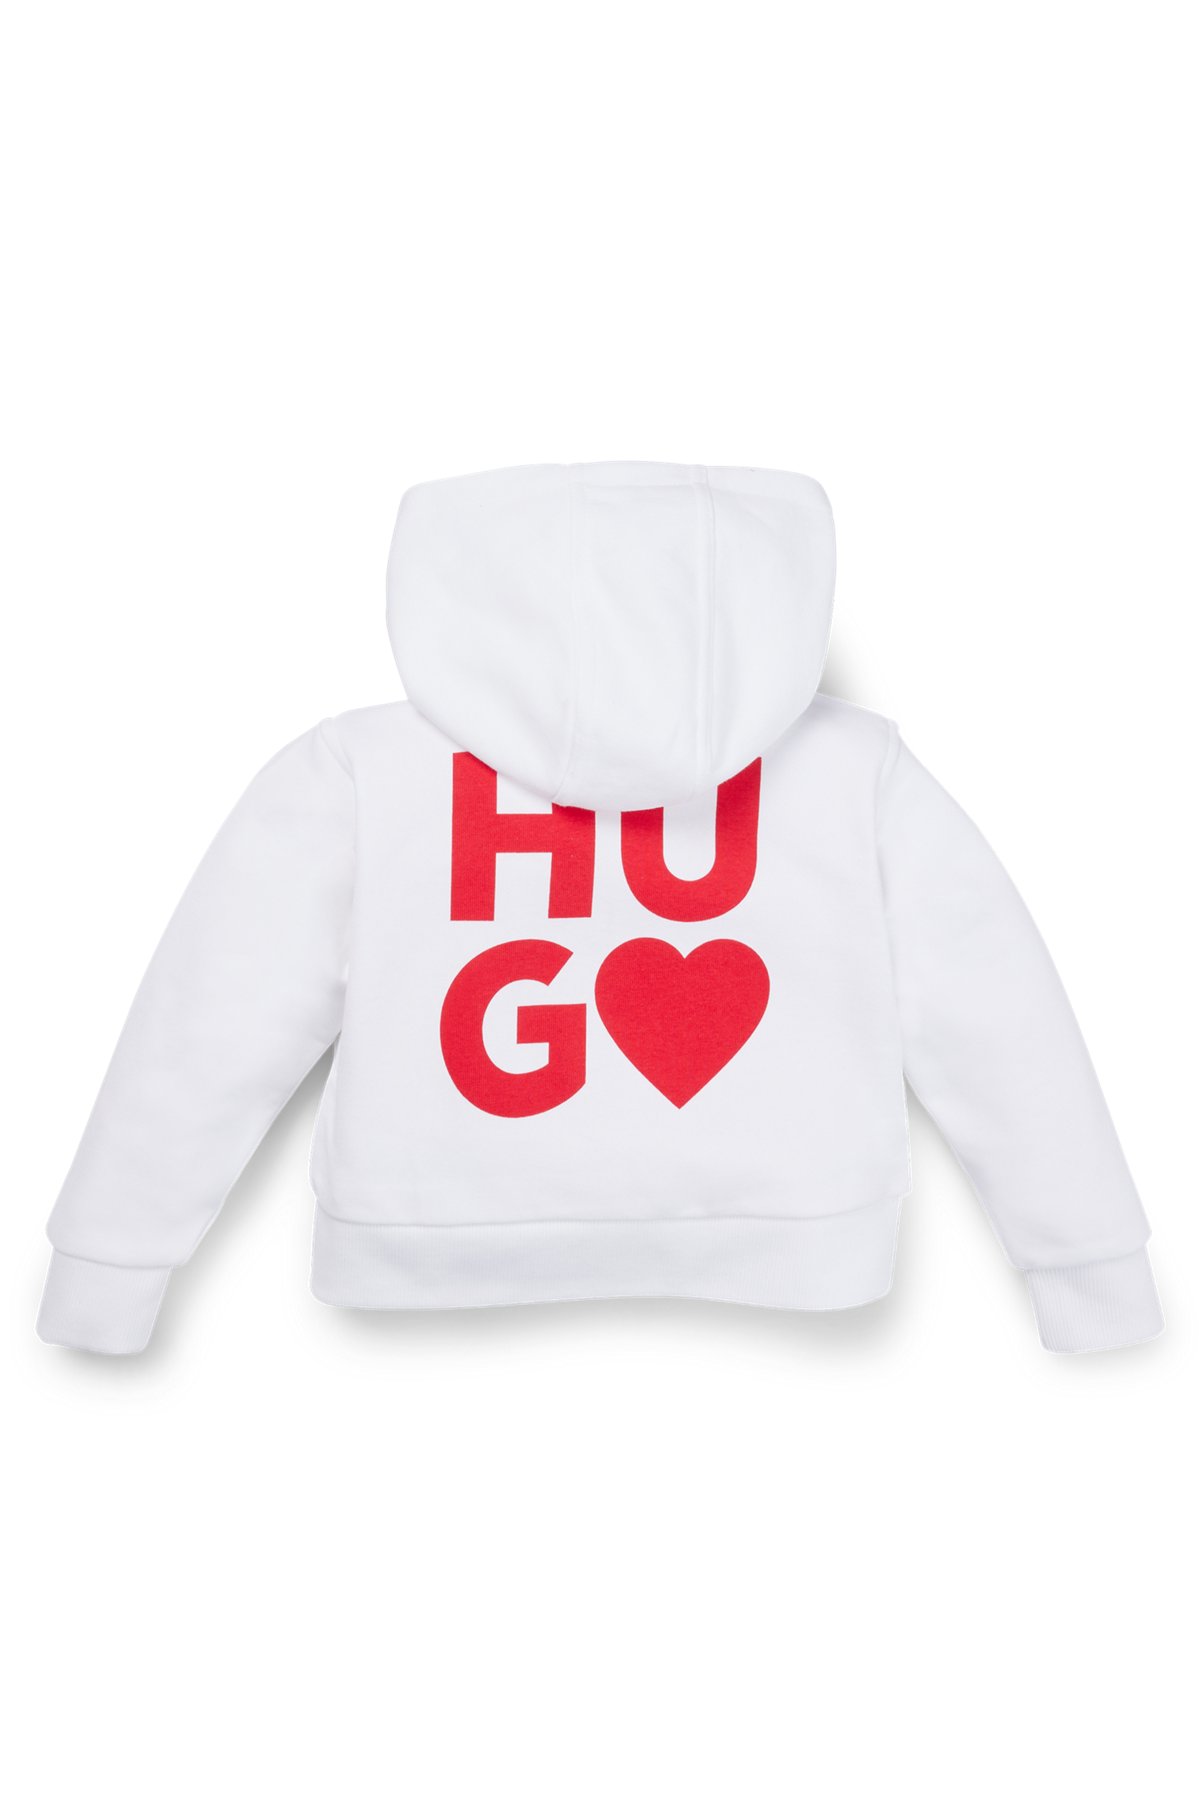 Kids' cotton-blend zip-up hoodie with logo details, White